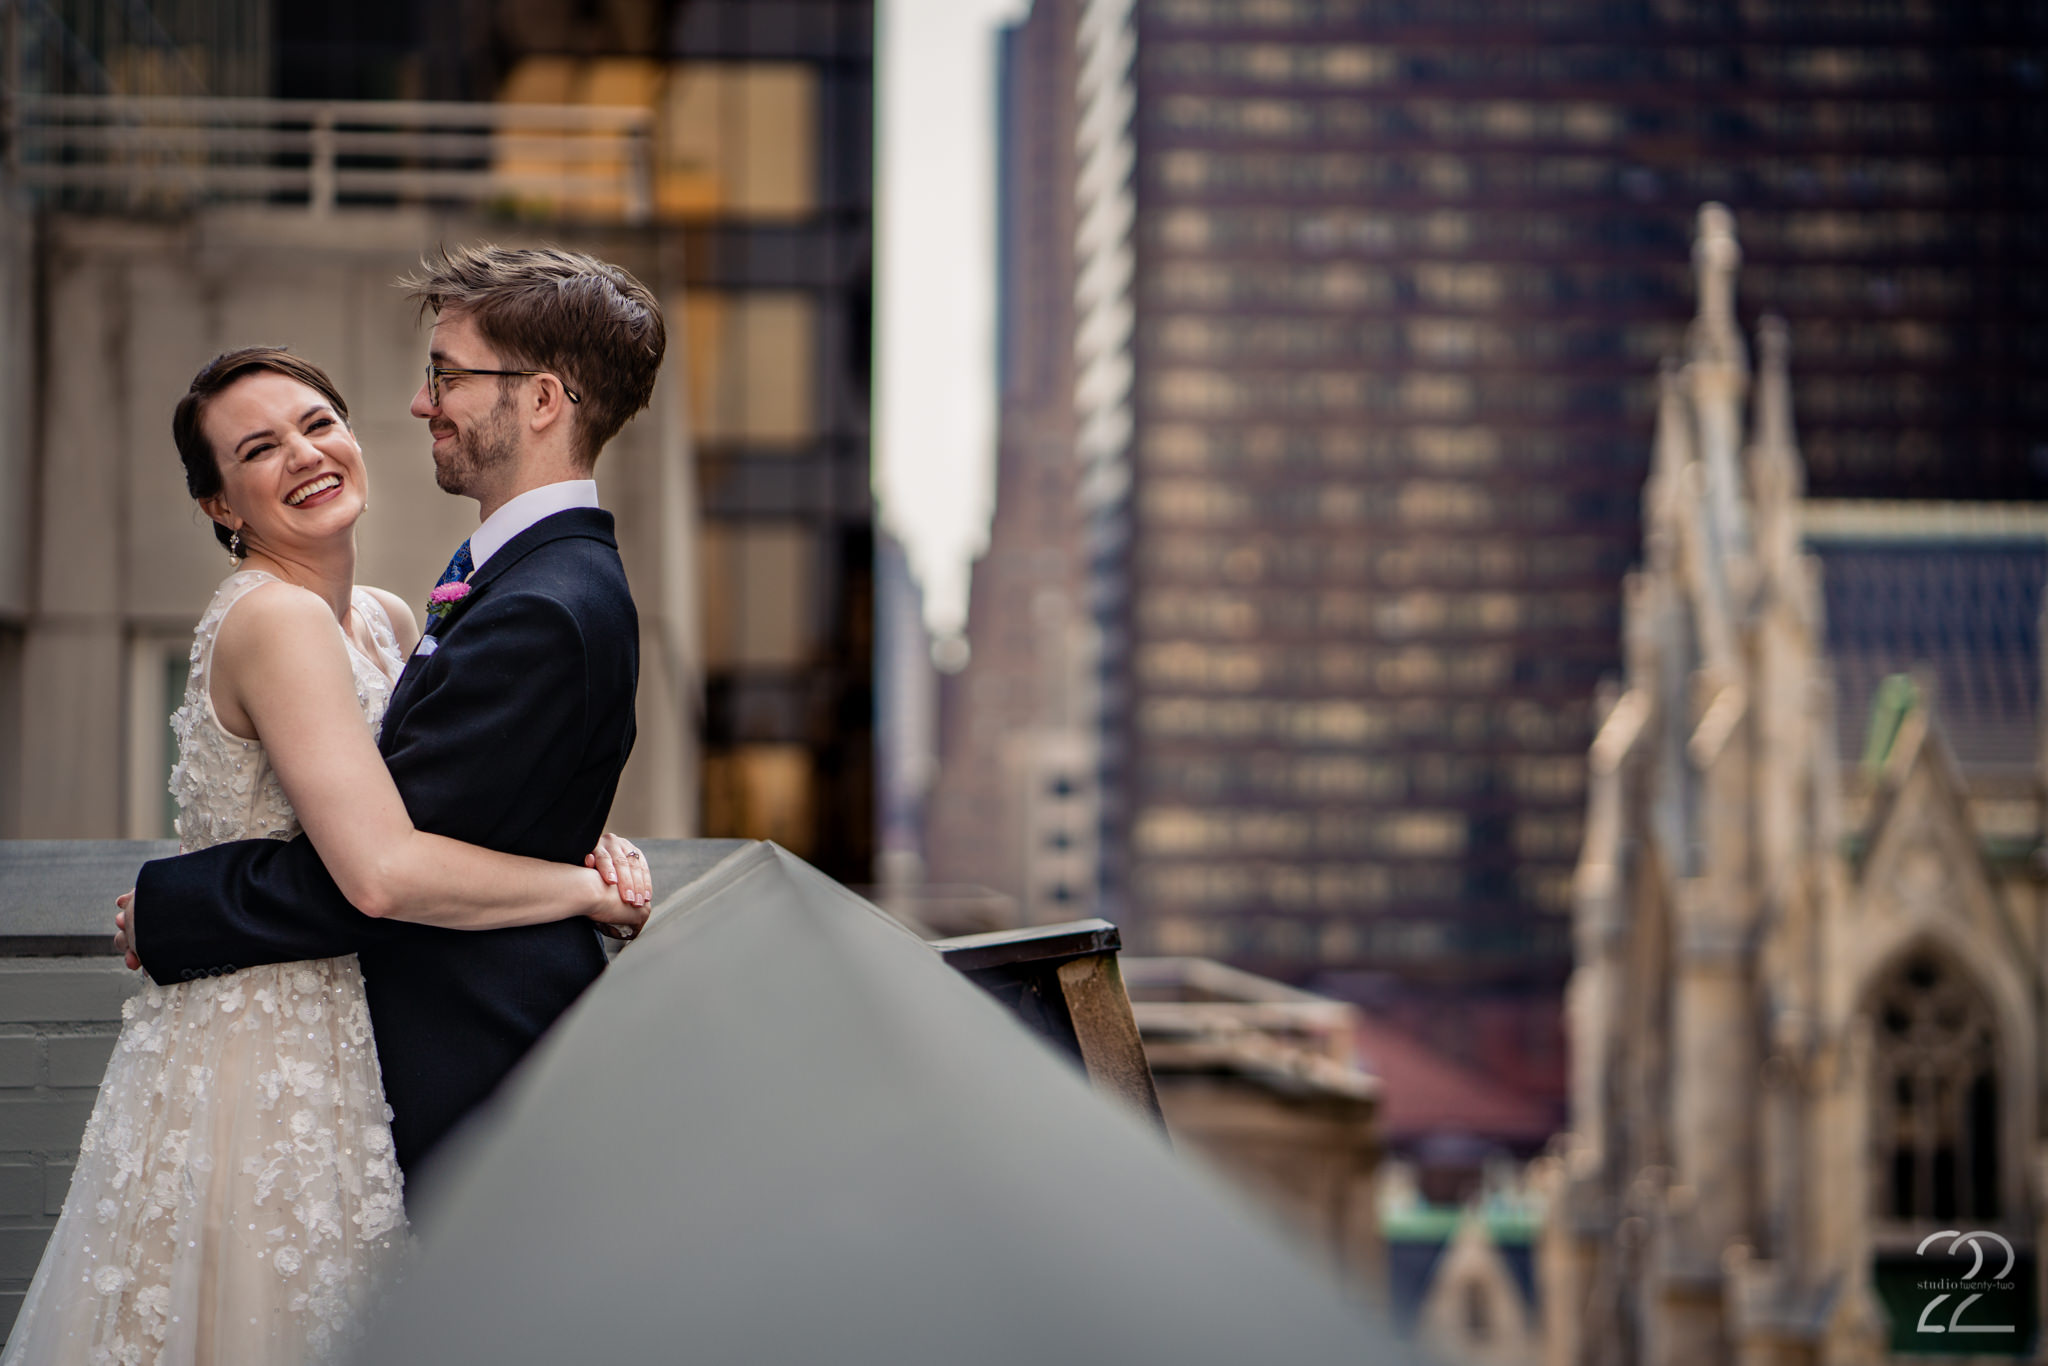  You have planned your wedding to be completely you, so let Studio 22 Photography capture that essence. This NYC wedding wouldn’t have been complete without an image of NYC as a background. 3West Club, was an amazing venue for every aspect of the wedding day and was in a stellar location for photographs. 